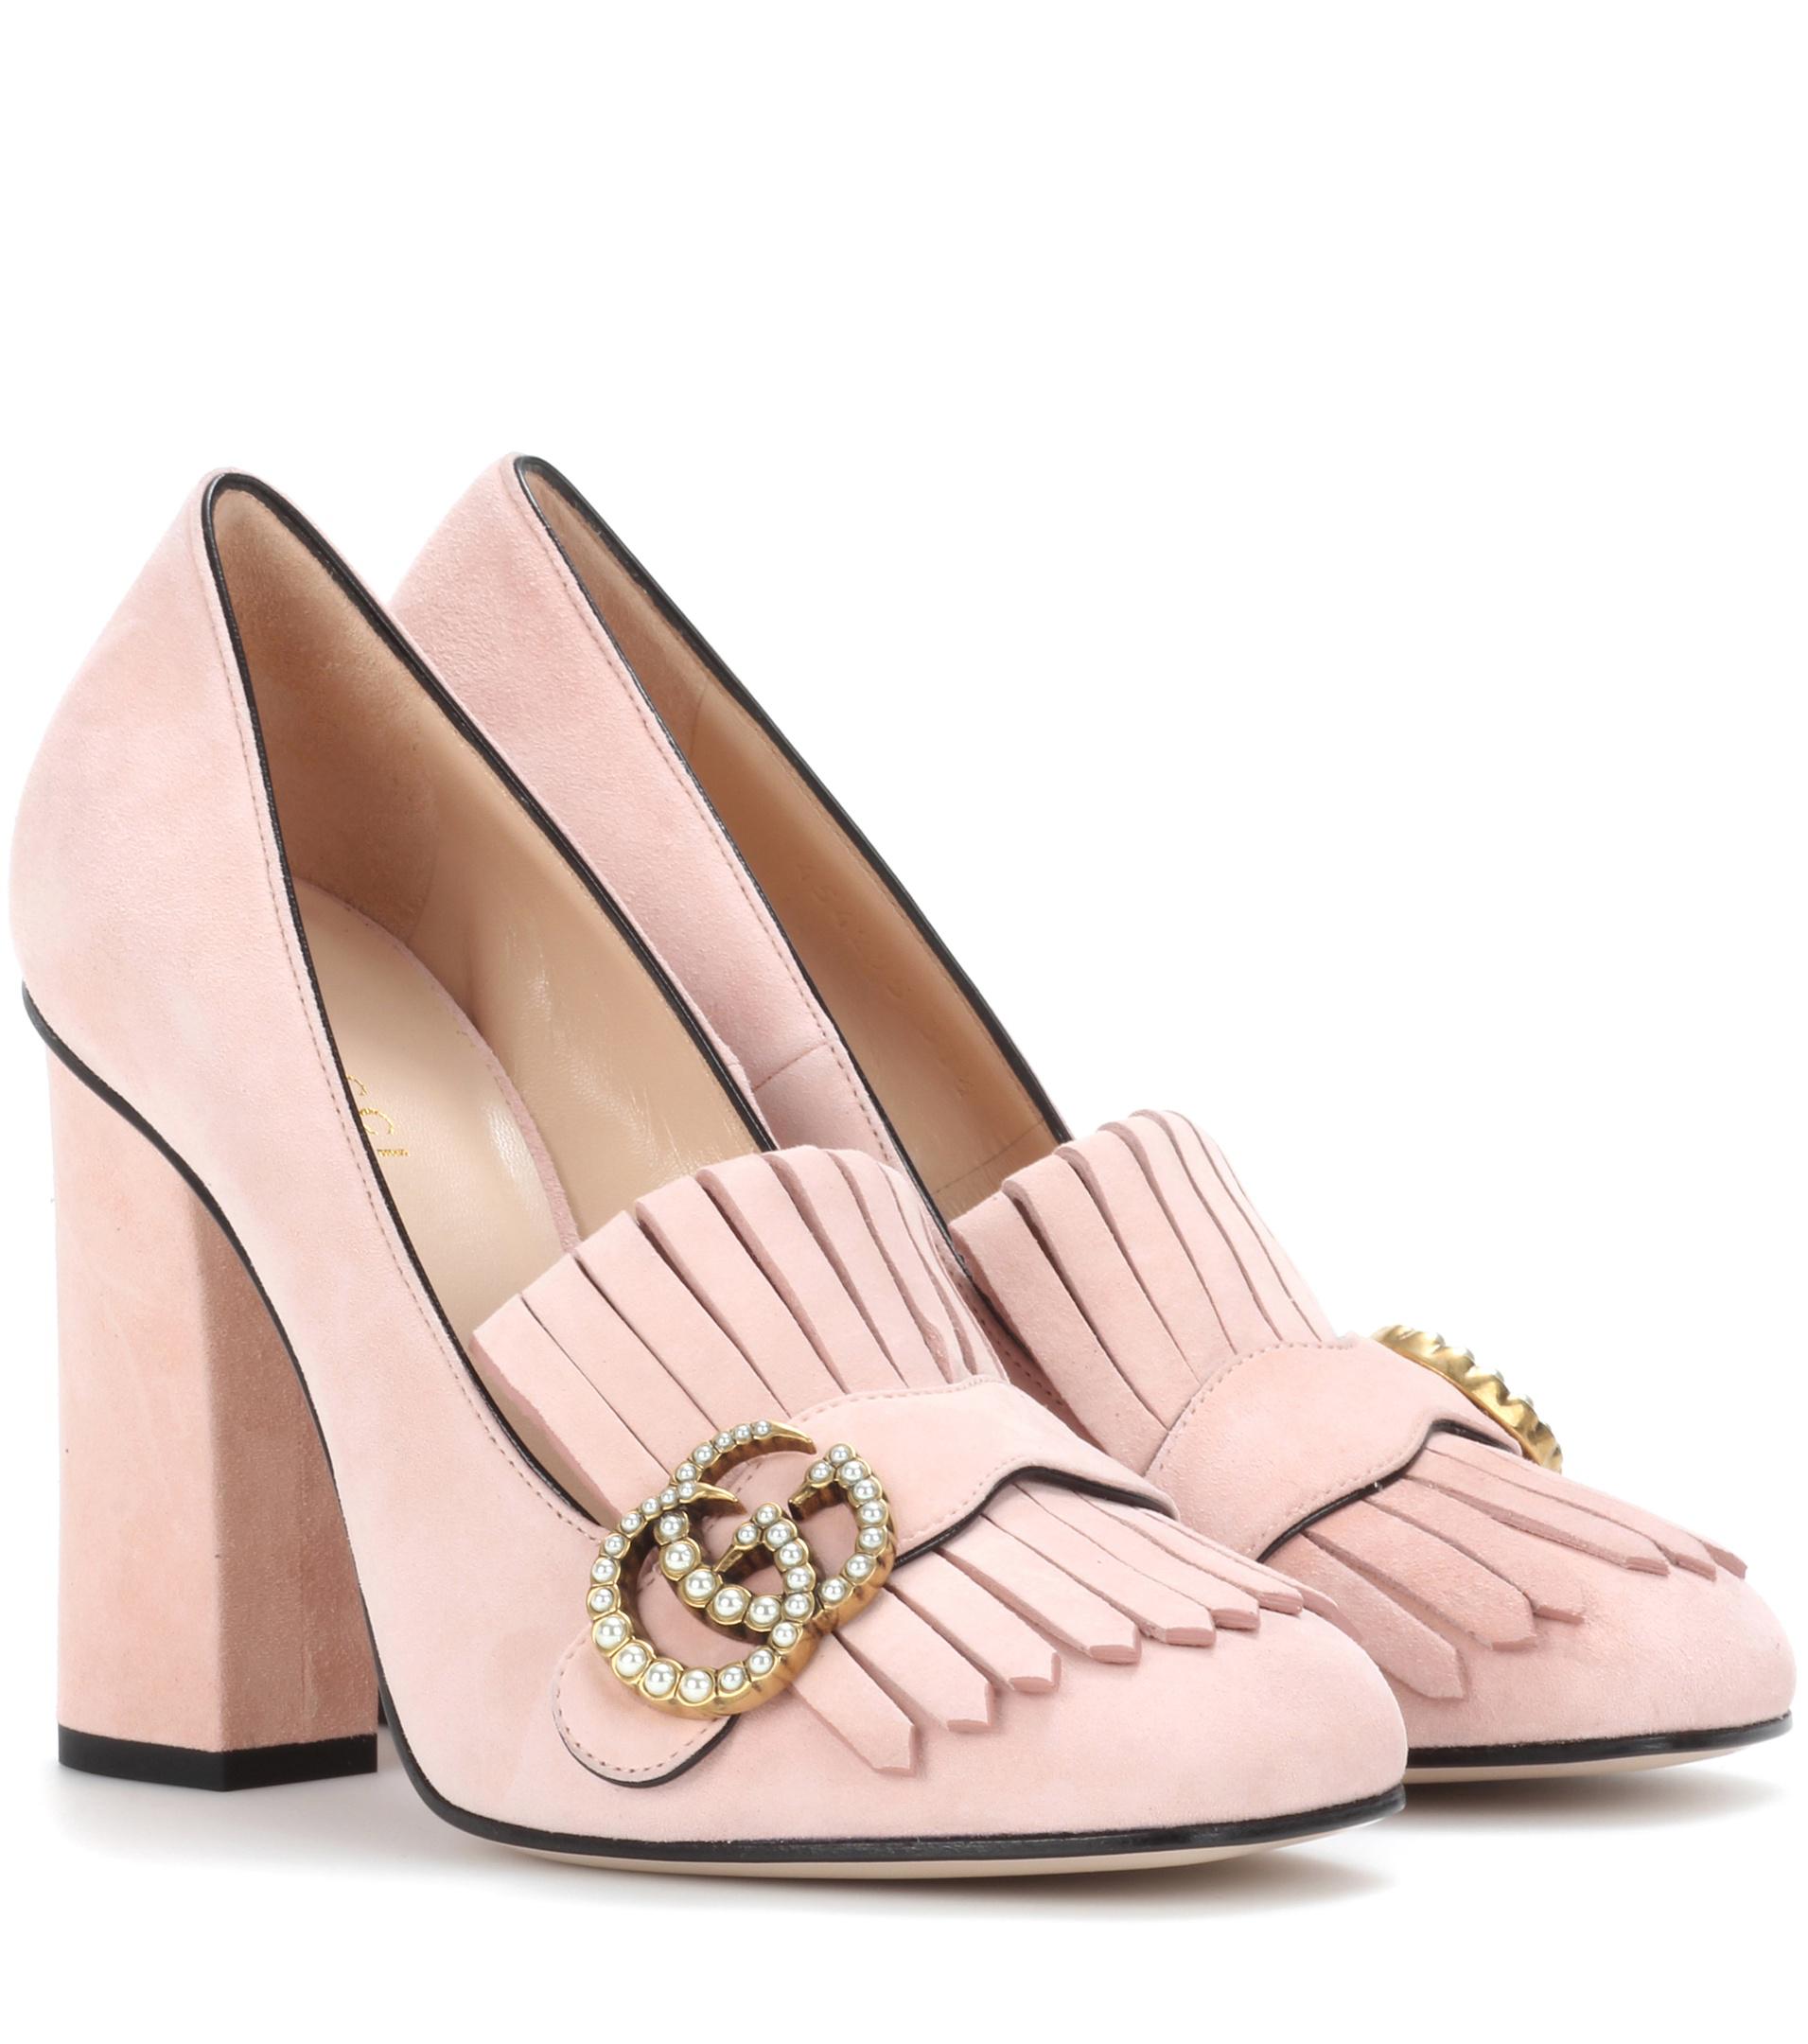 Gucci Suede Loafer Pumps in Pink - Lyst